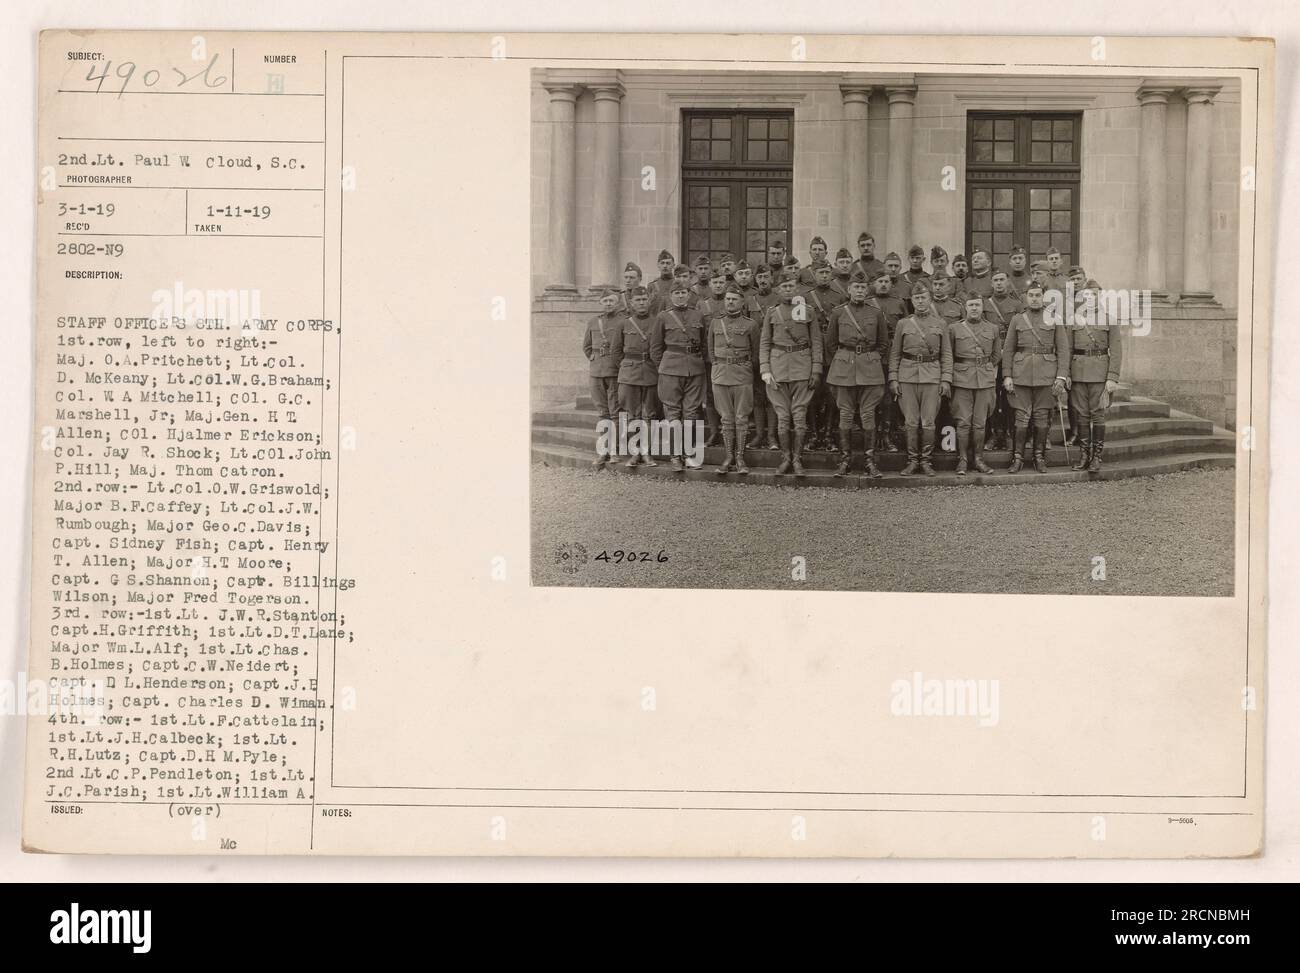 Group photo of staff officers from the 8th Army Corps during World War One. The photo was taken on March 1, 1919. Major O.A. Pritchett, Lt. Col. D. McKeaney, Lt. Col. W.G. Braham, Colonel W.A. Mitchell, Colonel G.C. Marshall Jr., Major General I.T. Allen, Colonel Hjalmer Erickson, Colonel Jay R. Shock, Lt. Col. John P. Hill, and Major Thom Catron can be seen in the front row. The names of the officers in the following rows are also listed. The photo is numbered 188 and was taken by 2nd Lt. Paul W. Cloud. Stock Photo